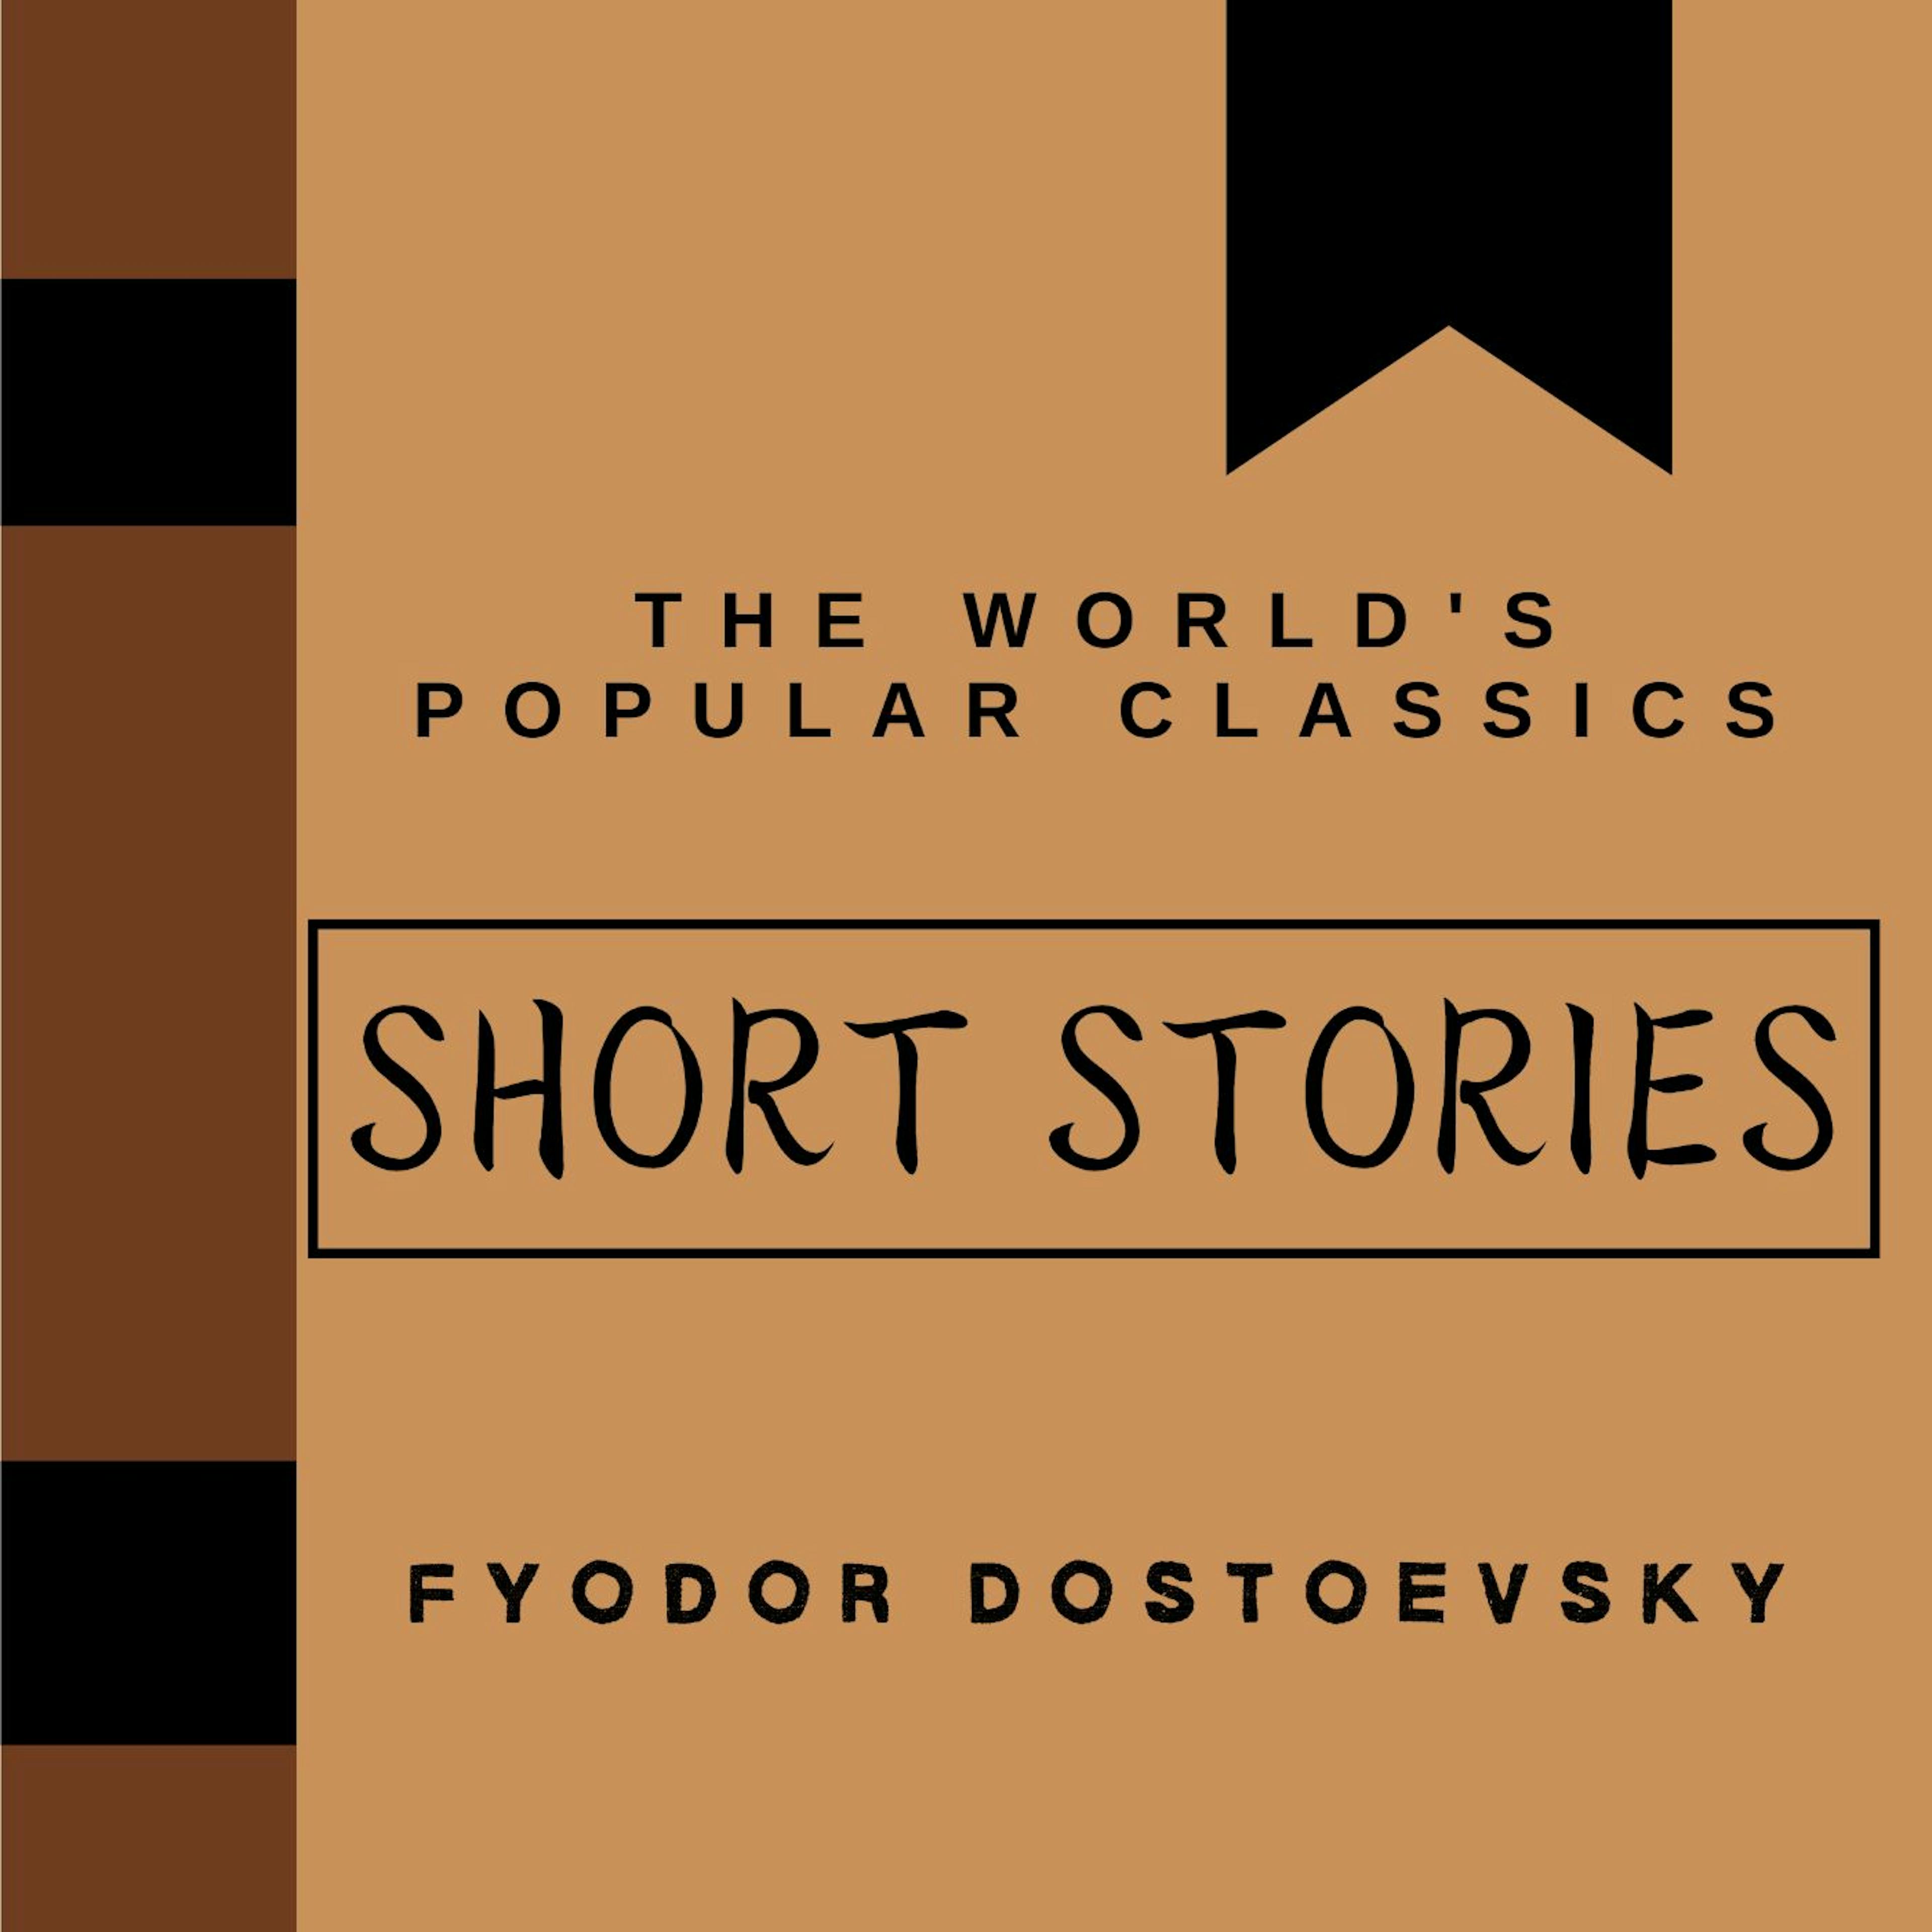 featured image - Short Stories by Fyodor Dostoyevsky - Table of Links